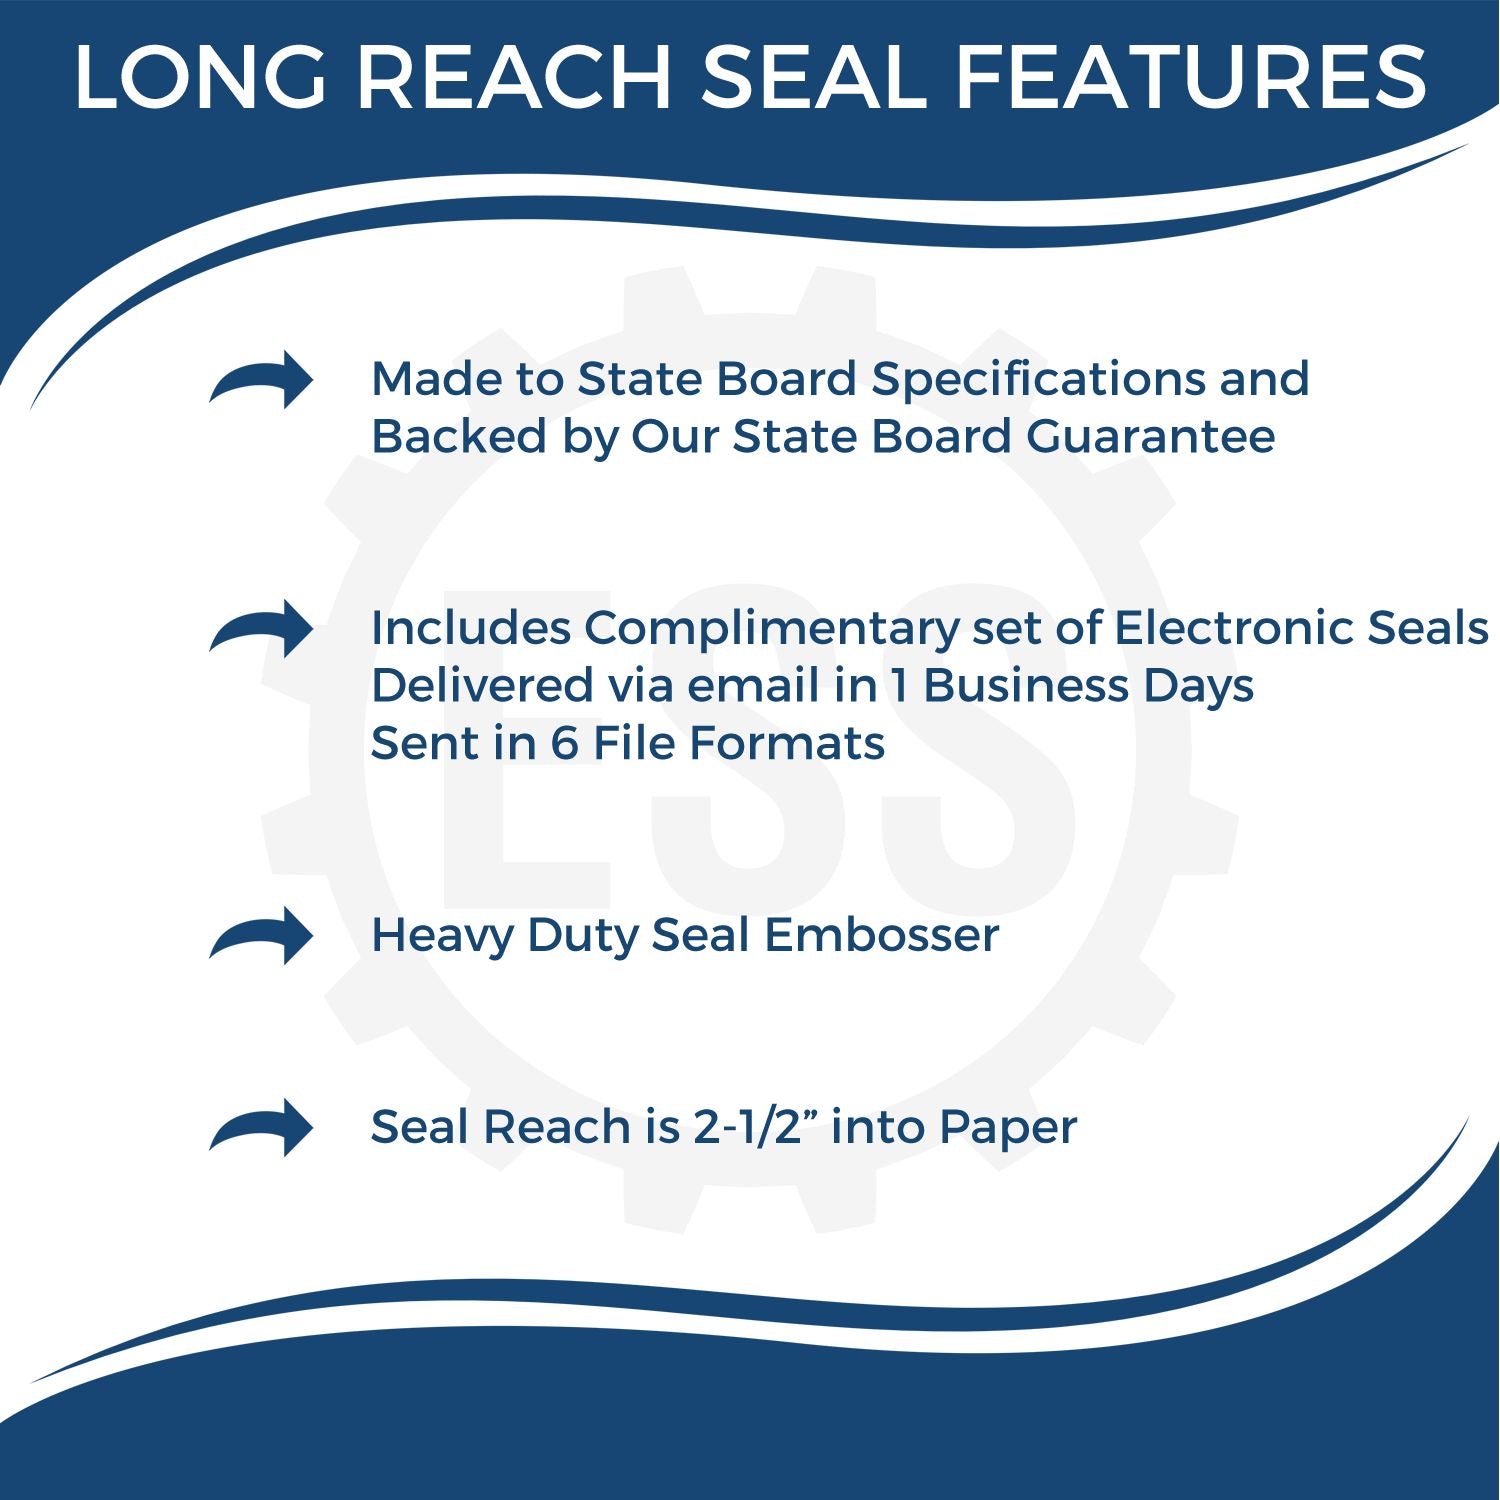 The main image for the Long Reach North Carolina PE Seal depicting a sample of the imprint and electronic files